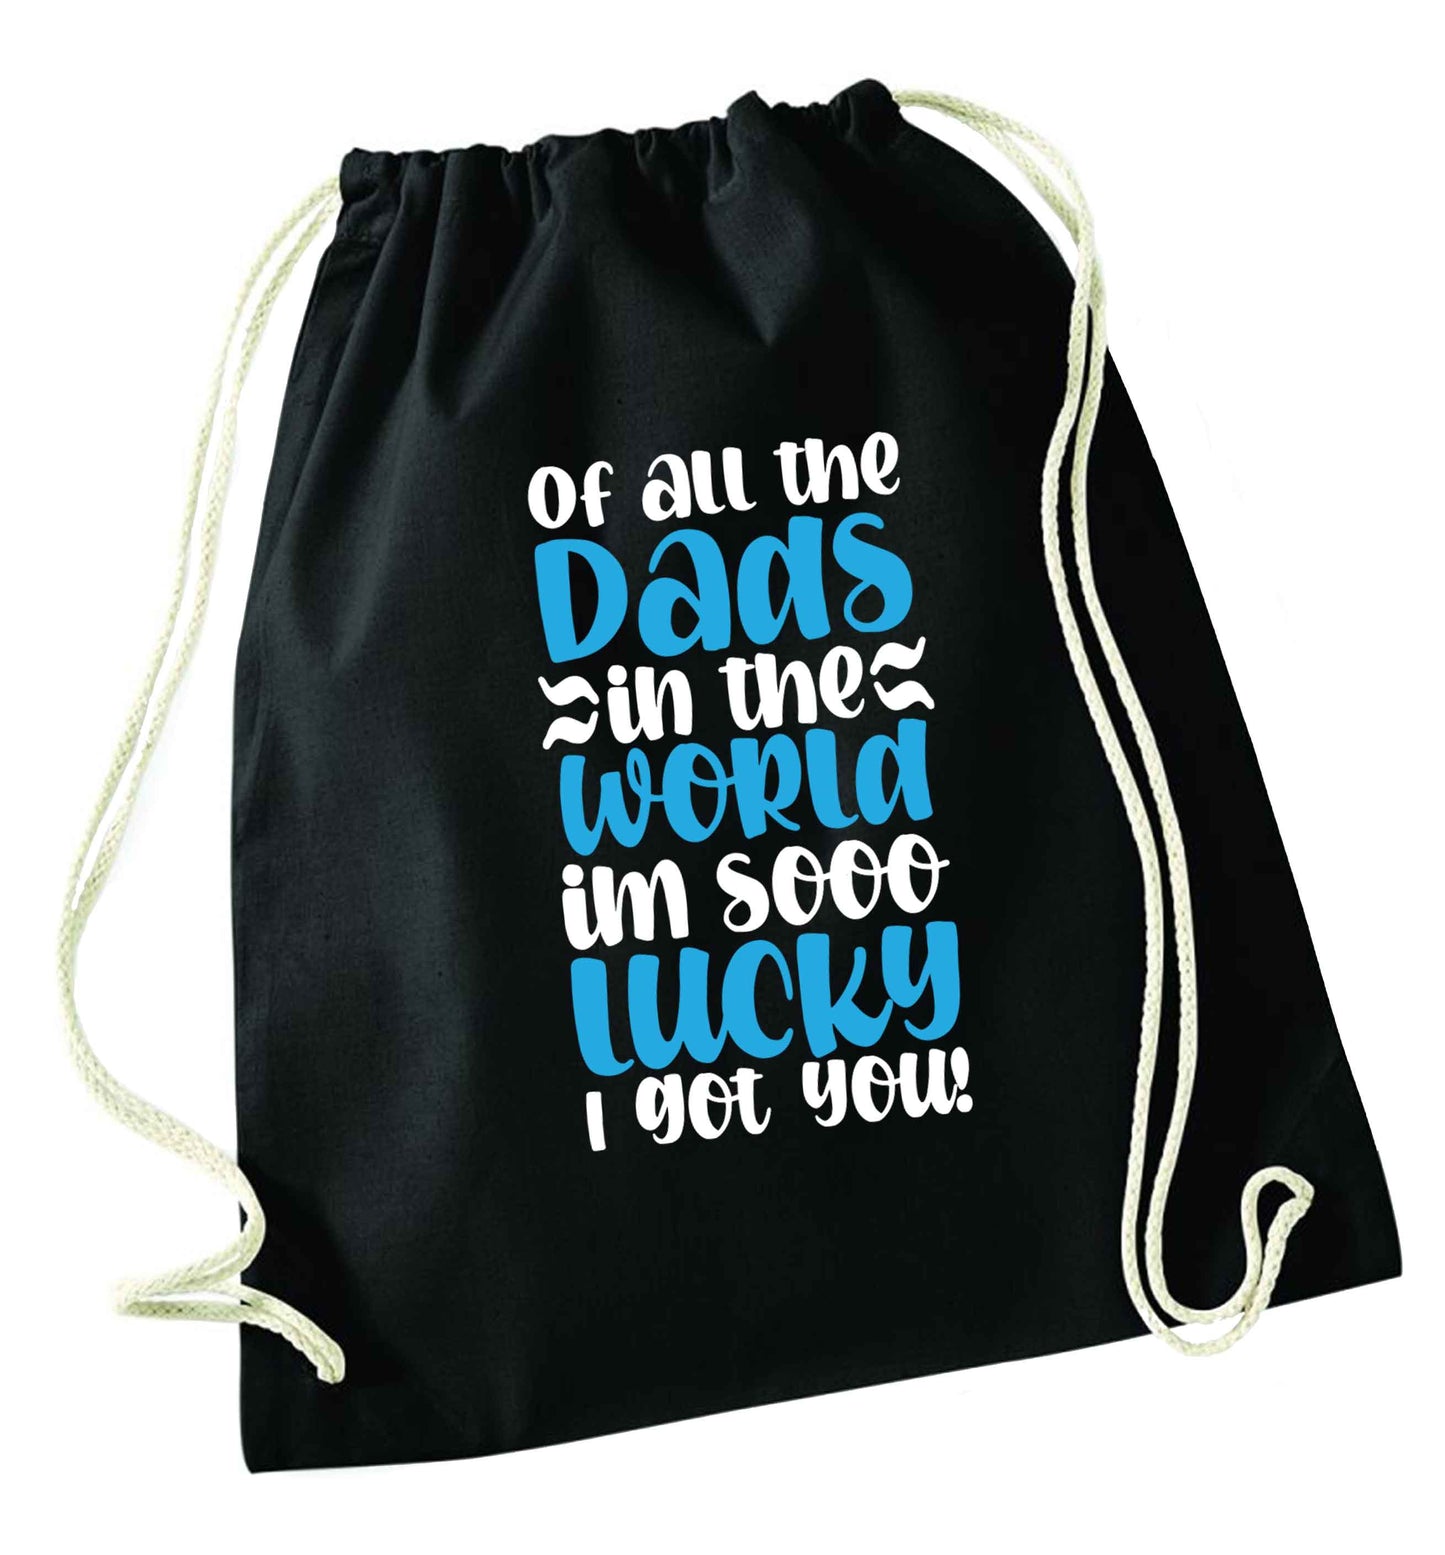 Of all the Dads in the world I'm so lucky I got you black drawstring bag